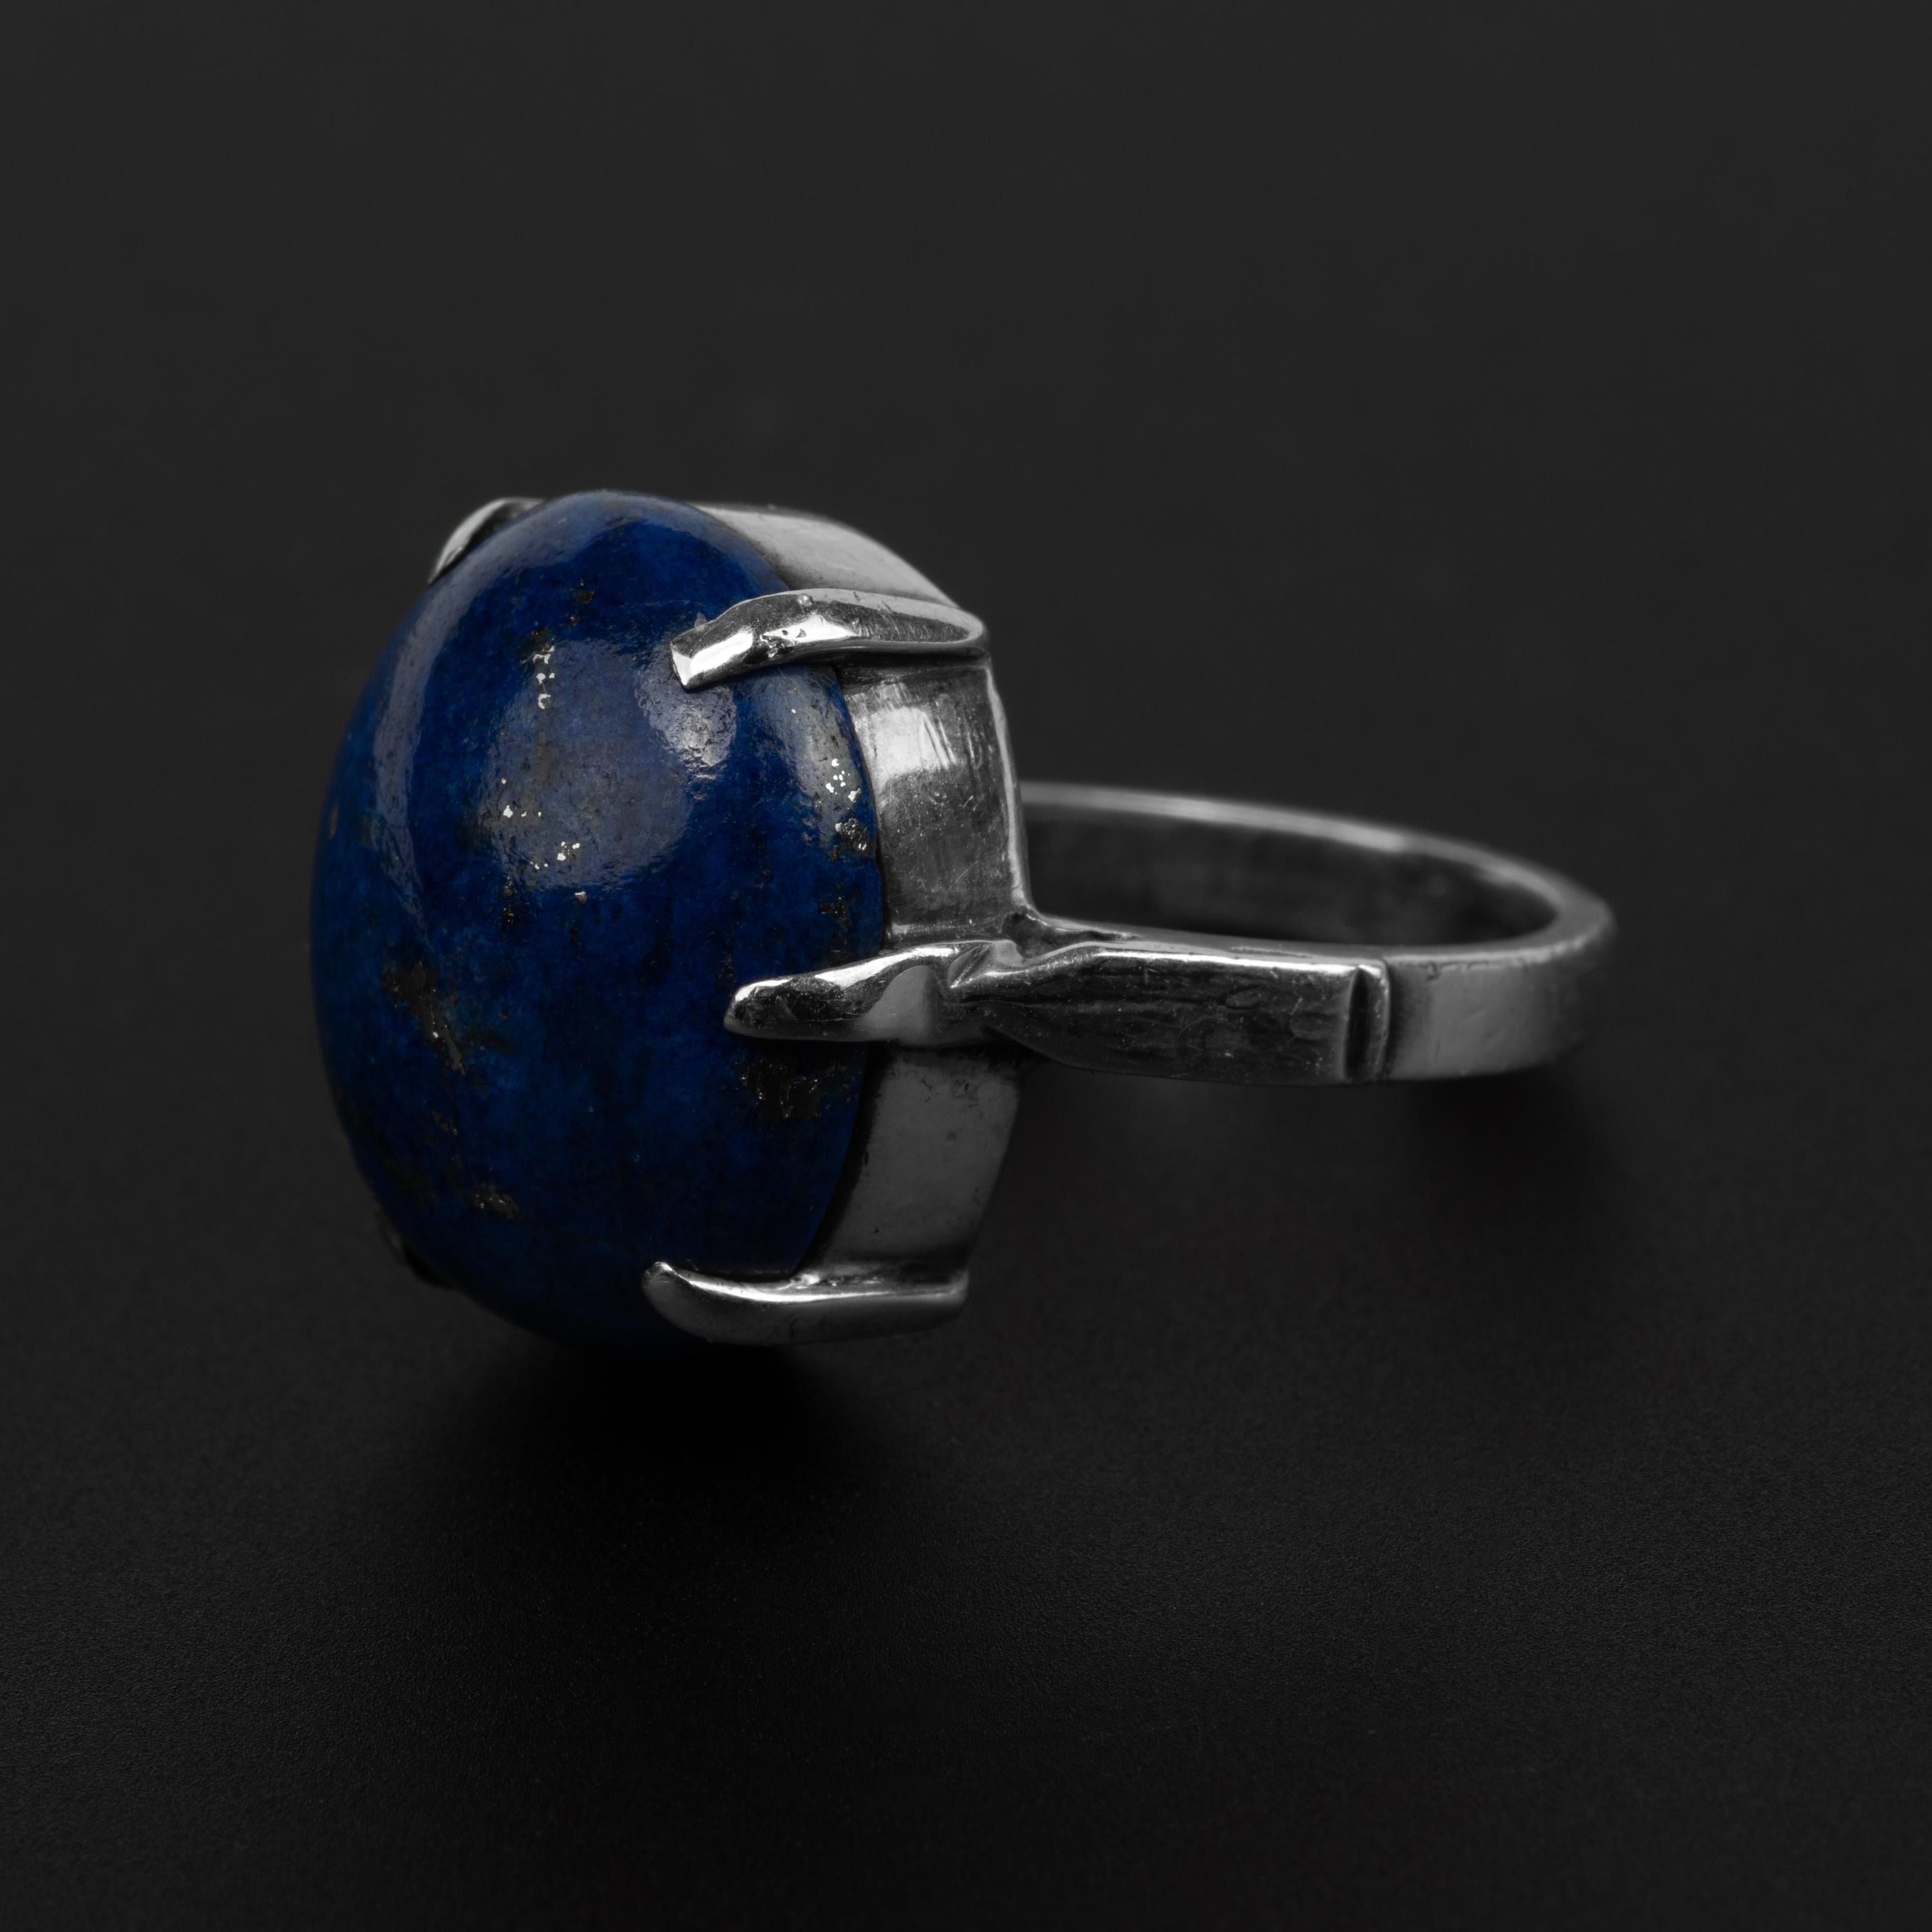 A vibrant deep blue cabochon of natural lapis lazuli —attractively flecked with pyrite— is secured by six tapered prongs in this handmade silver ring from the Arts & Crafts era, circa 1900.  I purchased this ring years ago in England and even though